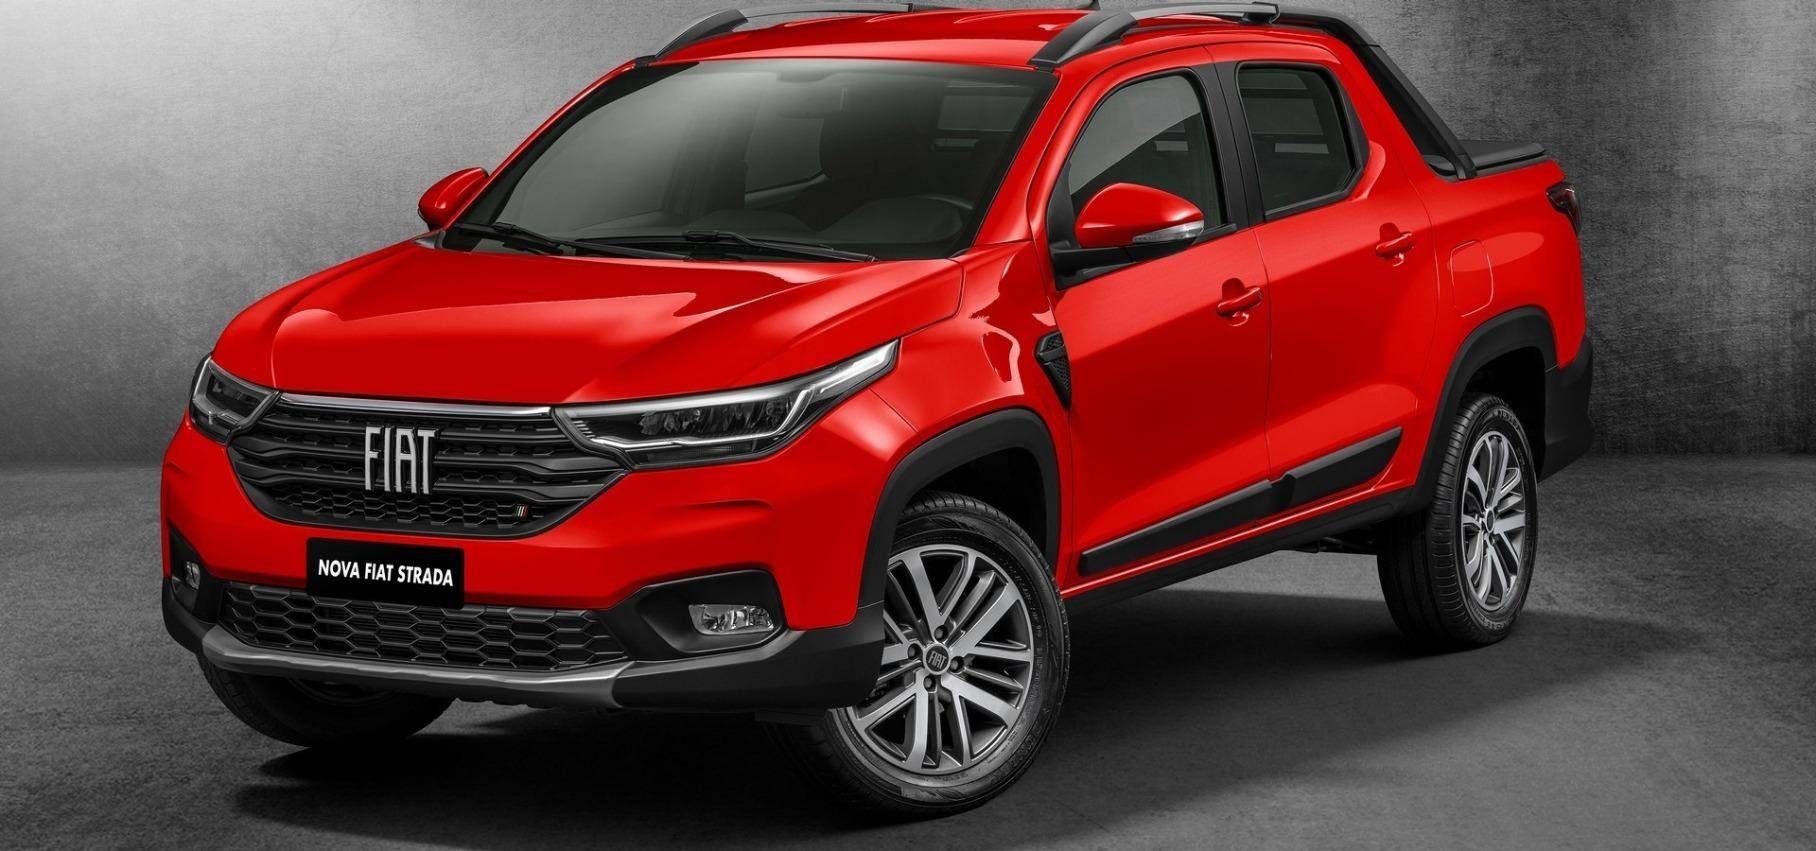 Fca's new 2021 fiat strada is a small pickup truck for south america | carscoops